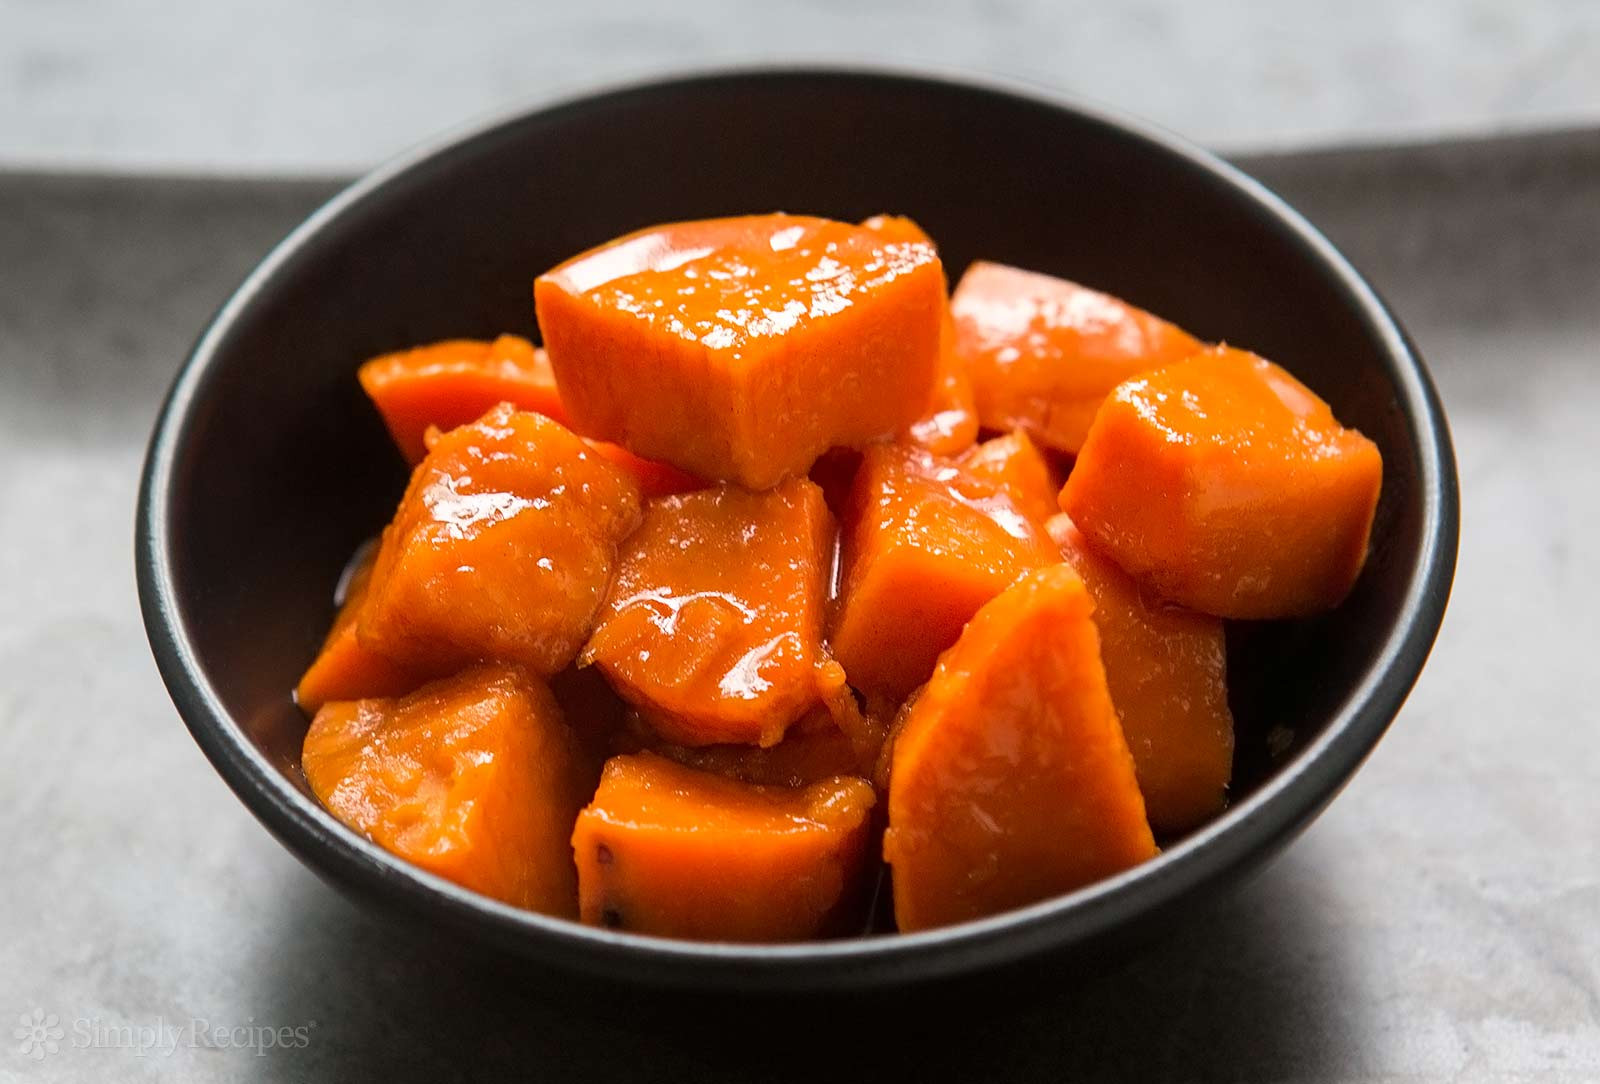 Yam Recipe For Thanksgiving
 Can d Yams Recipe